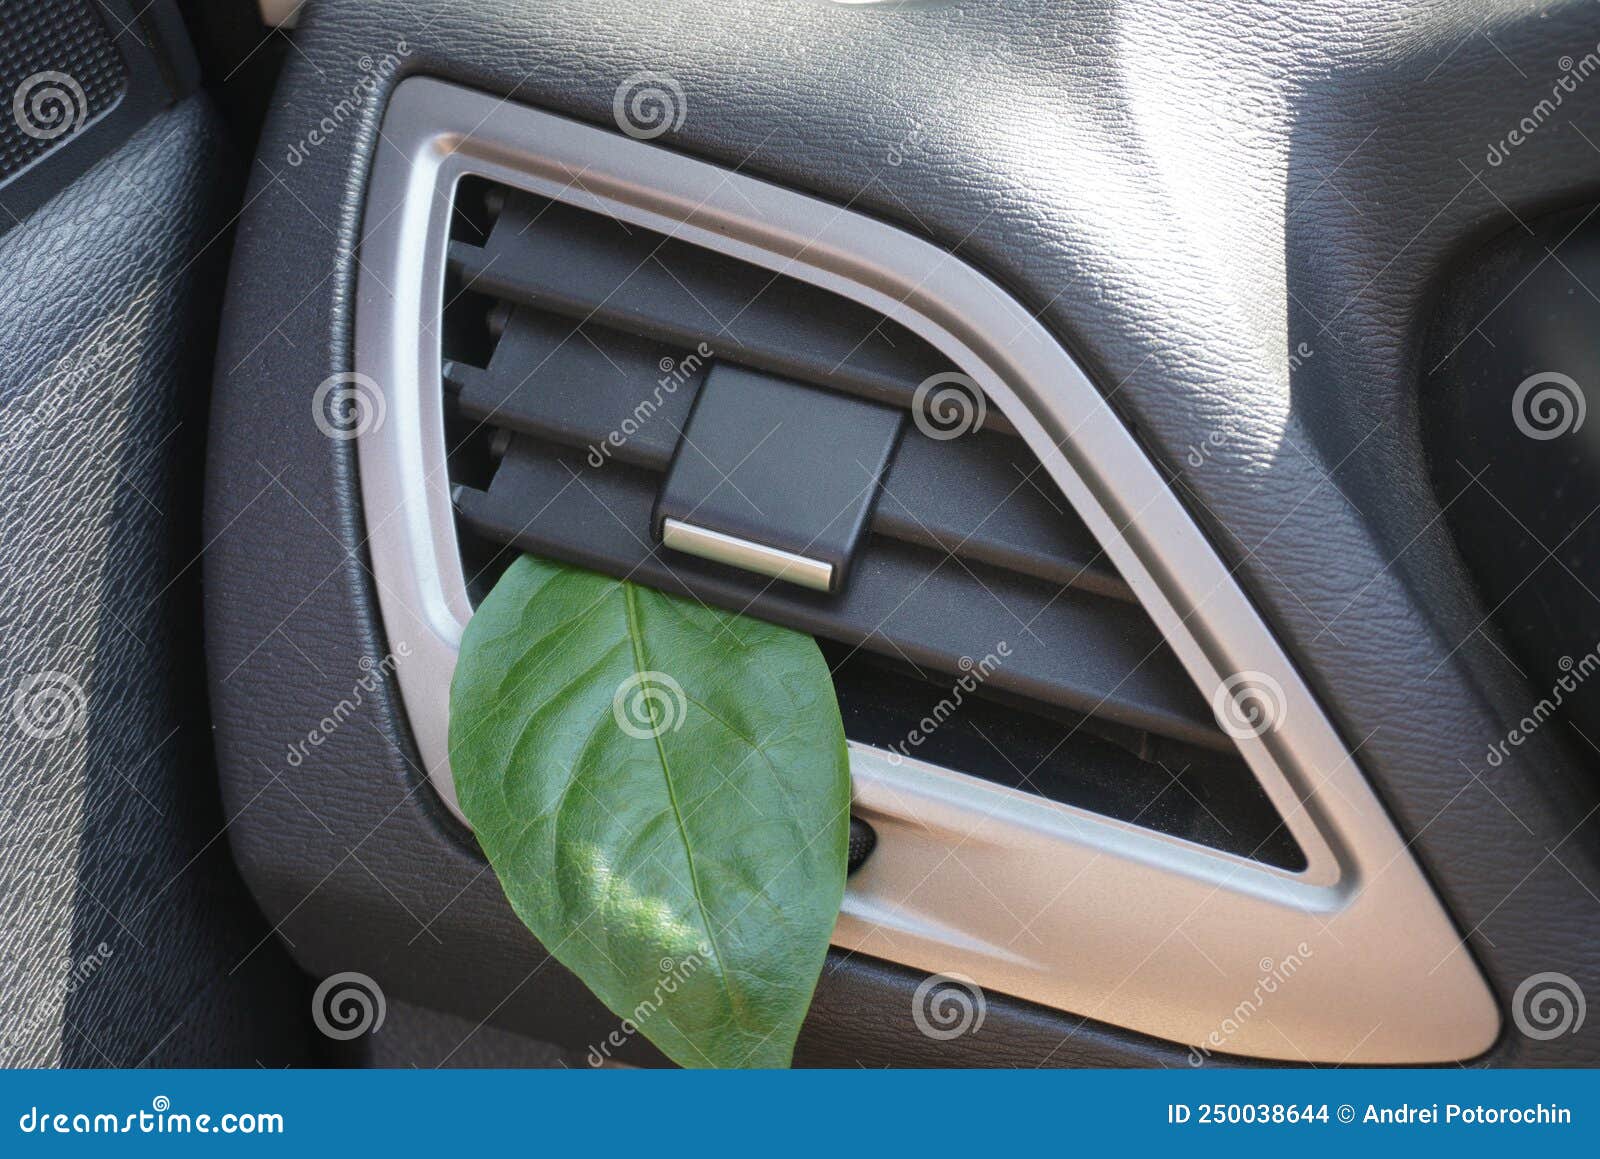 Green Leaf in the Ventilation Grille of the Car, As a Symbol of